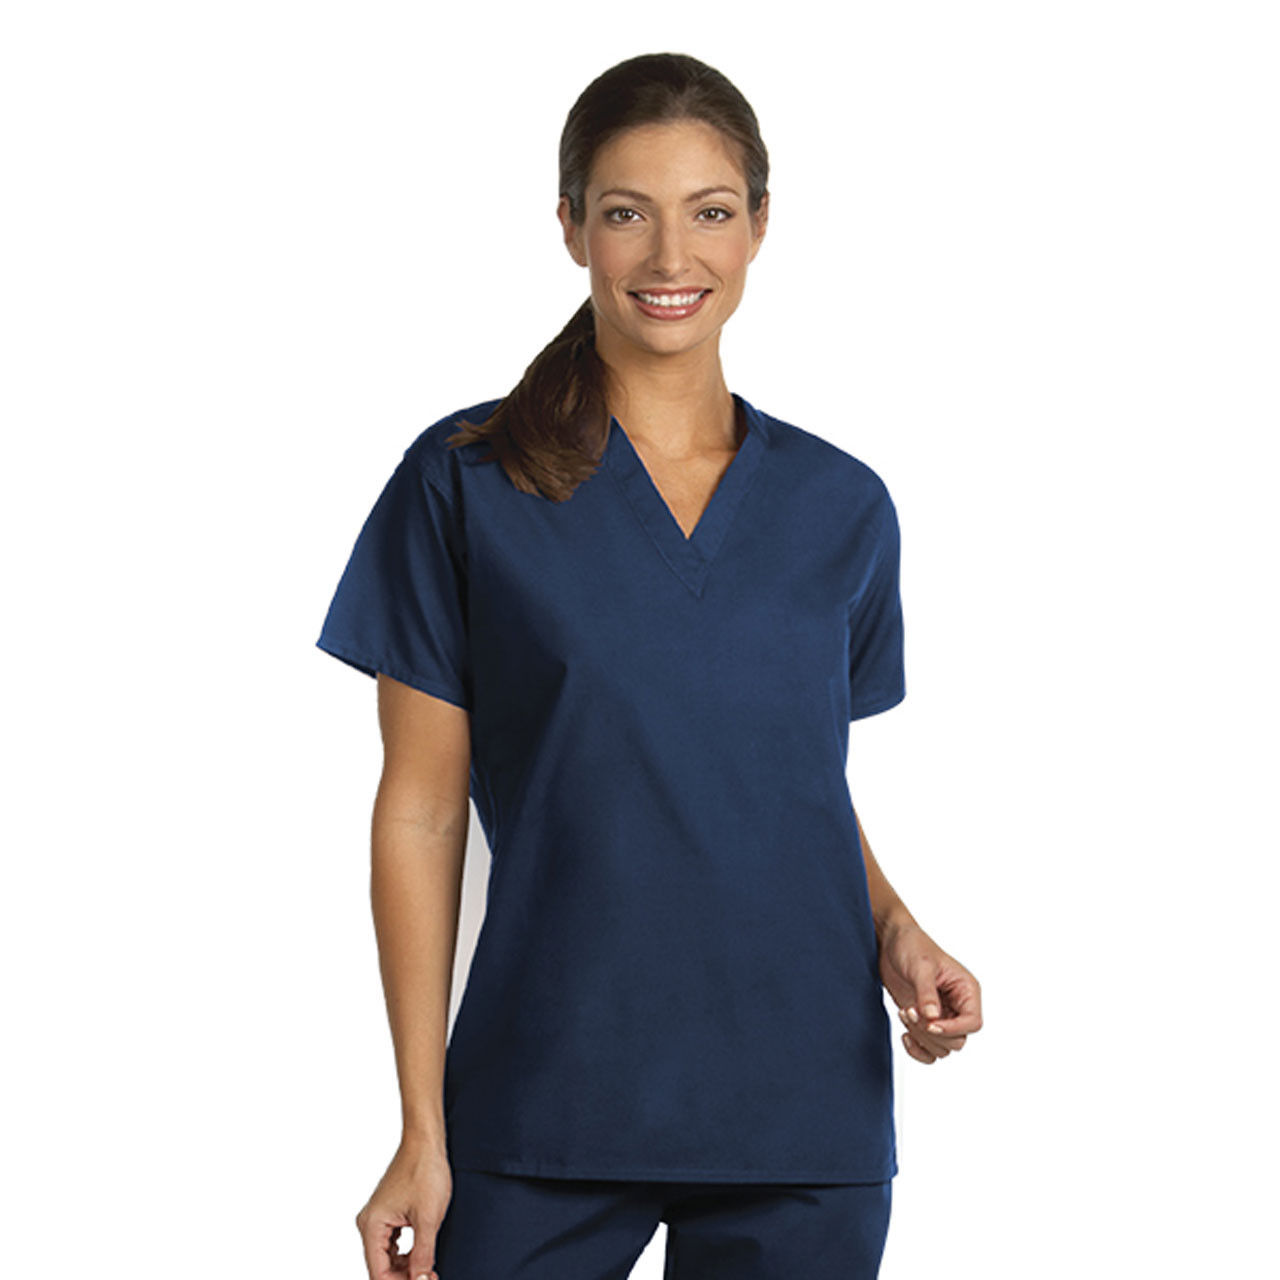 Are the cheap navy blue scrubs unisex and reversible?